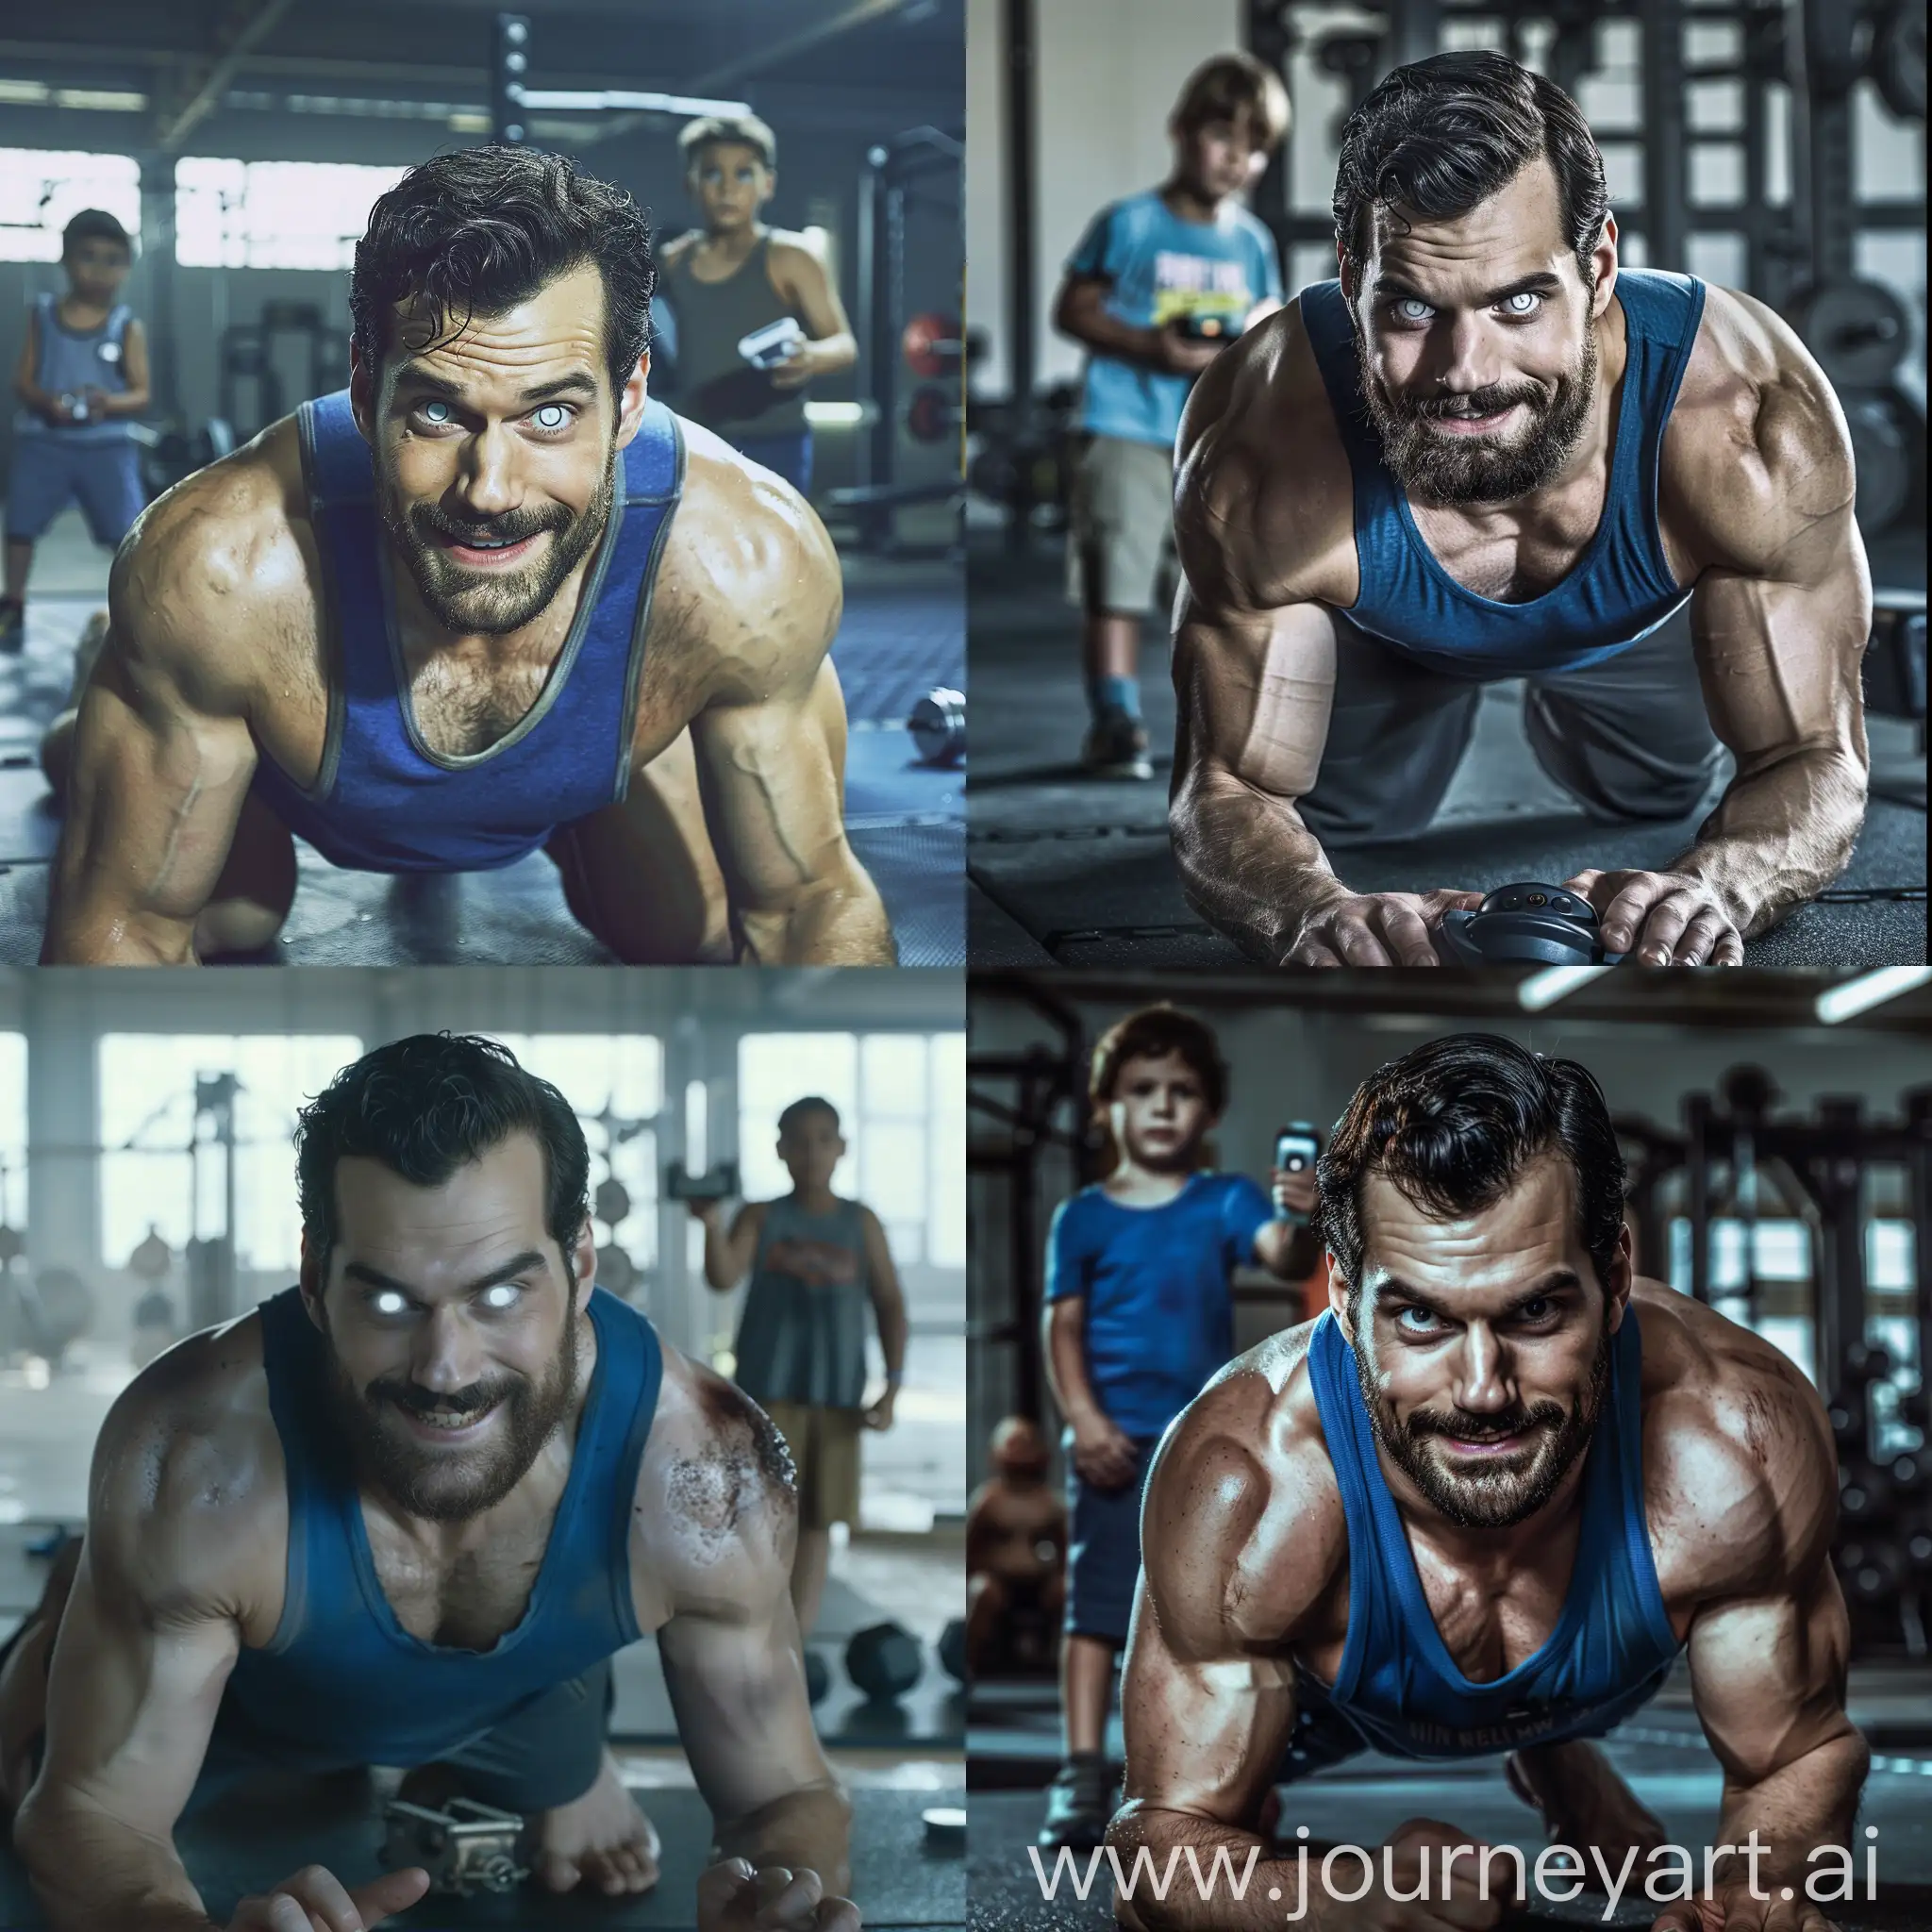 Cinematic lighting, realistic movie scene, Handsome bearded Henry Cavill, Muscular Henry Cavill crawling on all fours, wearing a blue tank top, burly beefy Henry Cavill, gym background, on all fours with his eyes white and with milky color pupils, white blank eyes, smiling Henry Cavill, crawling on all fours, with one handsome young overweight boy standing in the background holding a small controle remote device, young overweight man holding a control device on his hands, blurry empty gym background